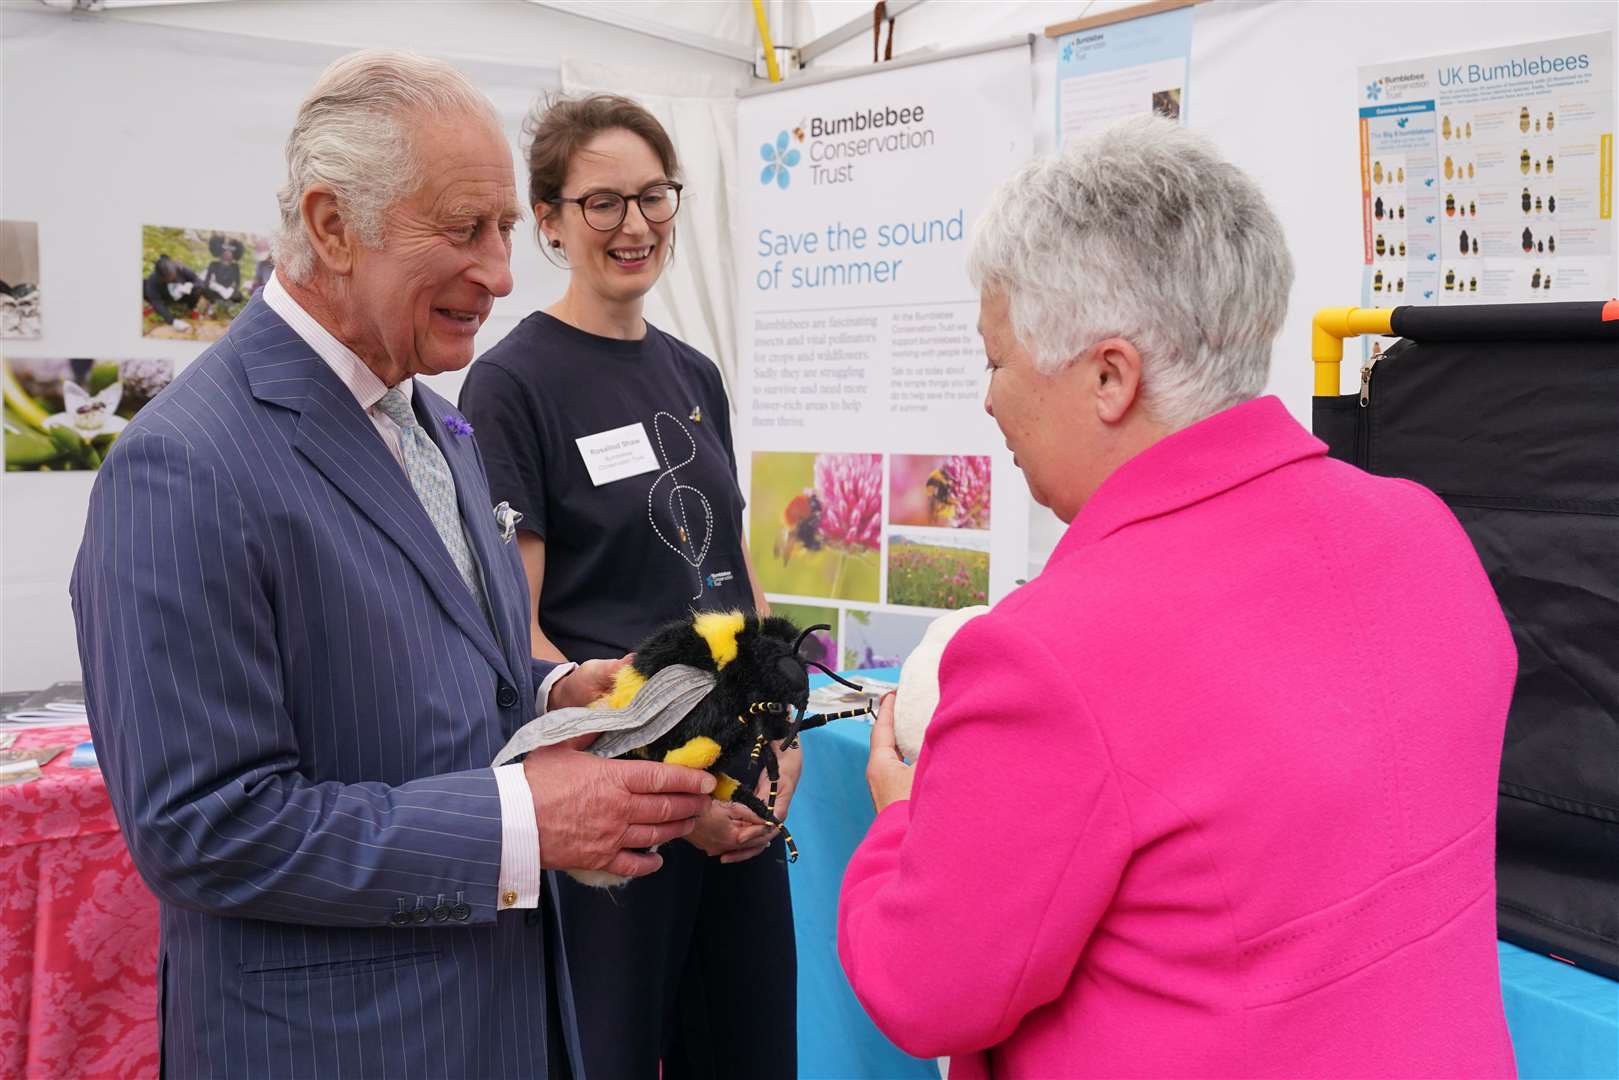 Charles is presented with a stuffed toy bumblebee by Gill Perkins, right, CEO of the Bumblebee Conservation Trust, and Rosalind Shaw, centre, project officer at the Bumblebee Conservation Trust (Jonathan Brady/PA)